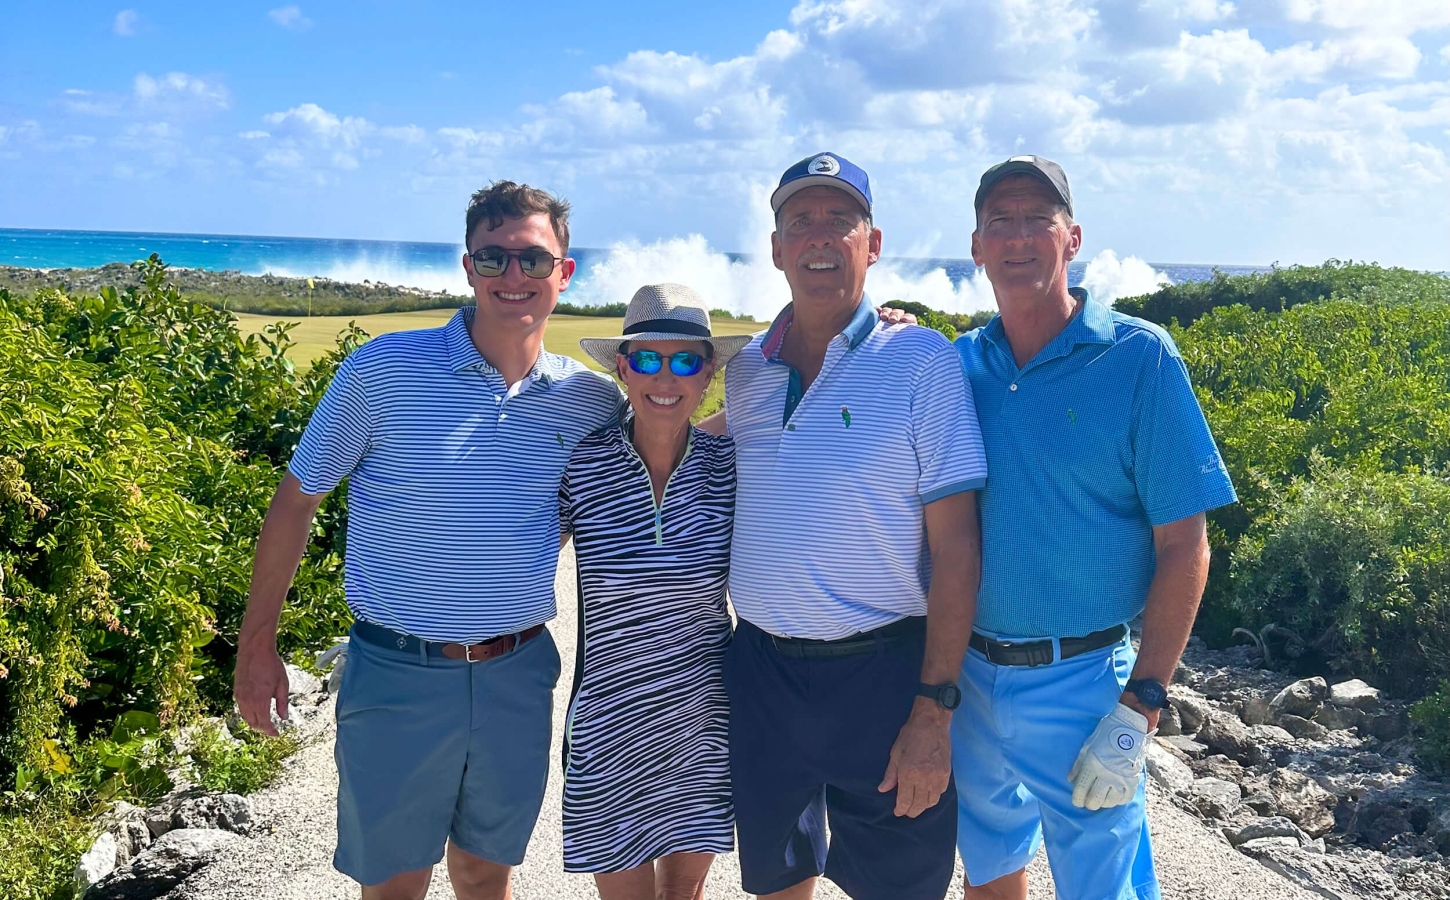 Abaco Golf Club members posing for a picture with the Bahamian sea on the background